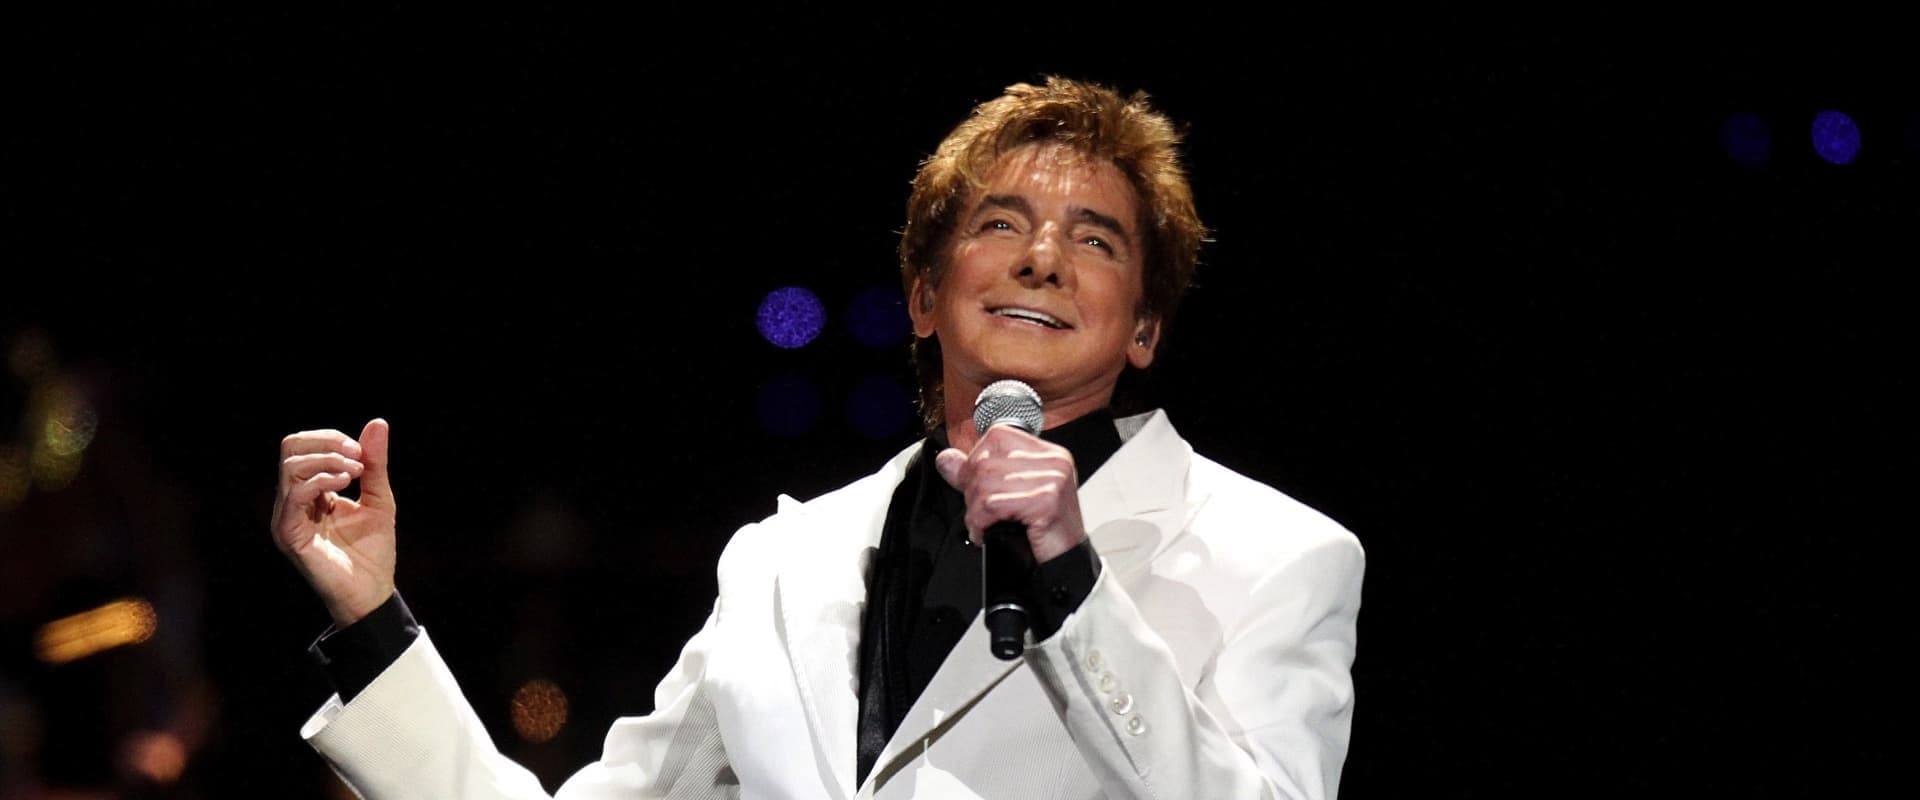 Manilow: Music and Passion